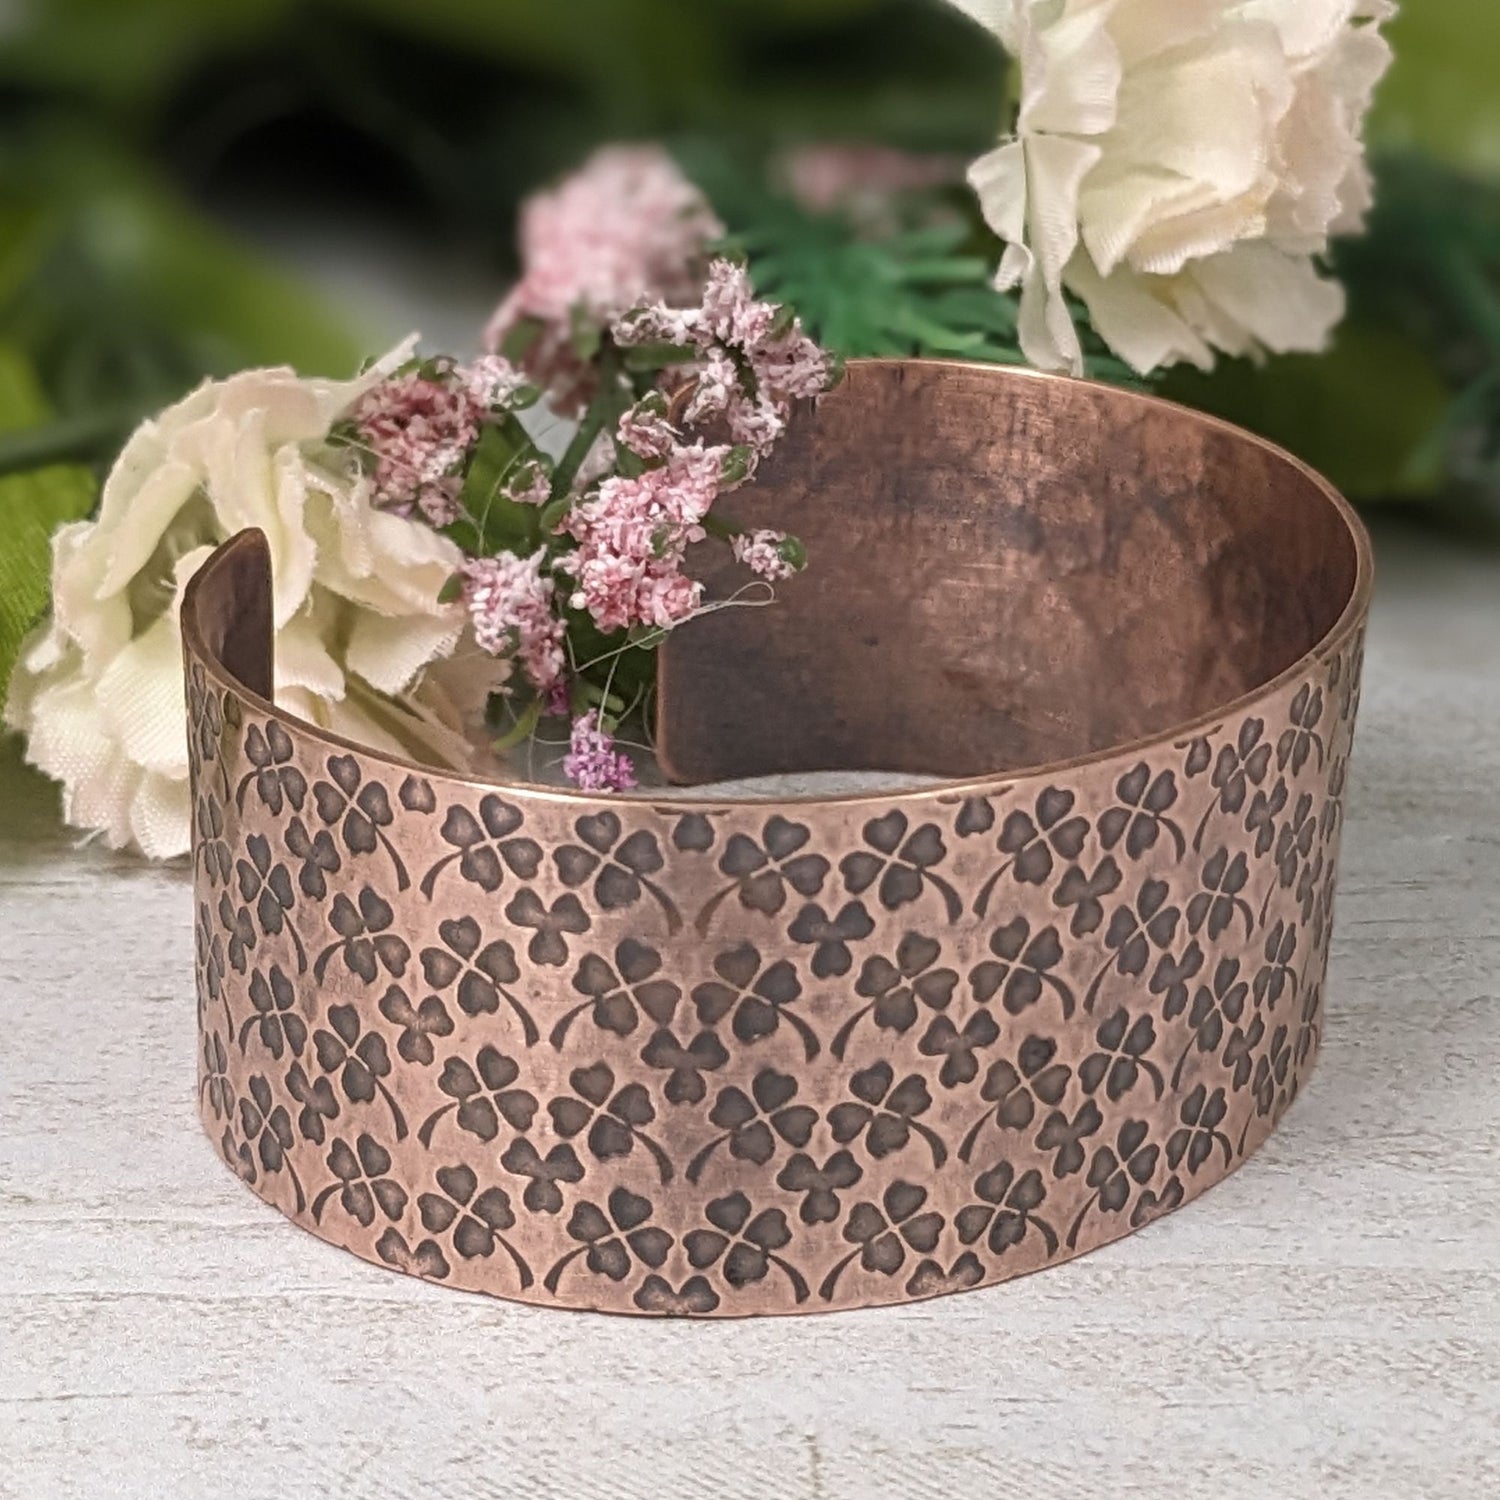 Copper cuff bracelet covered in impressions of small four leaf clovers.